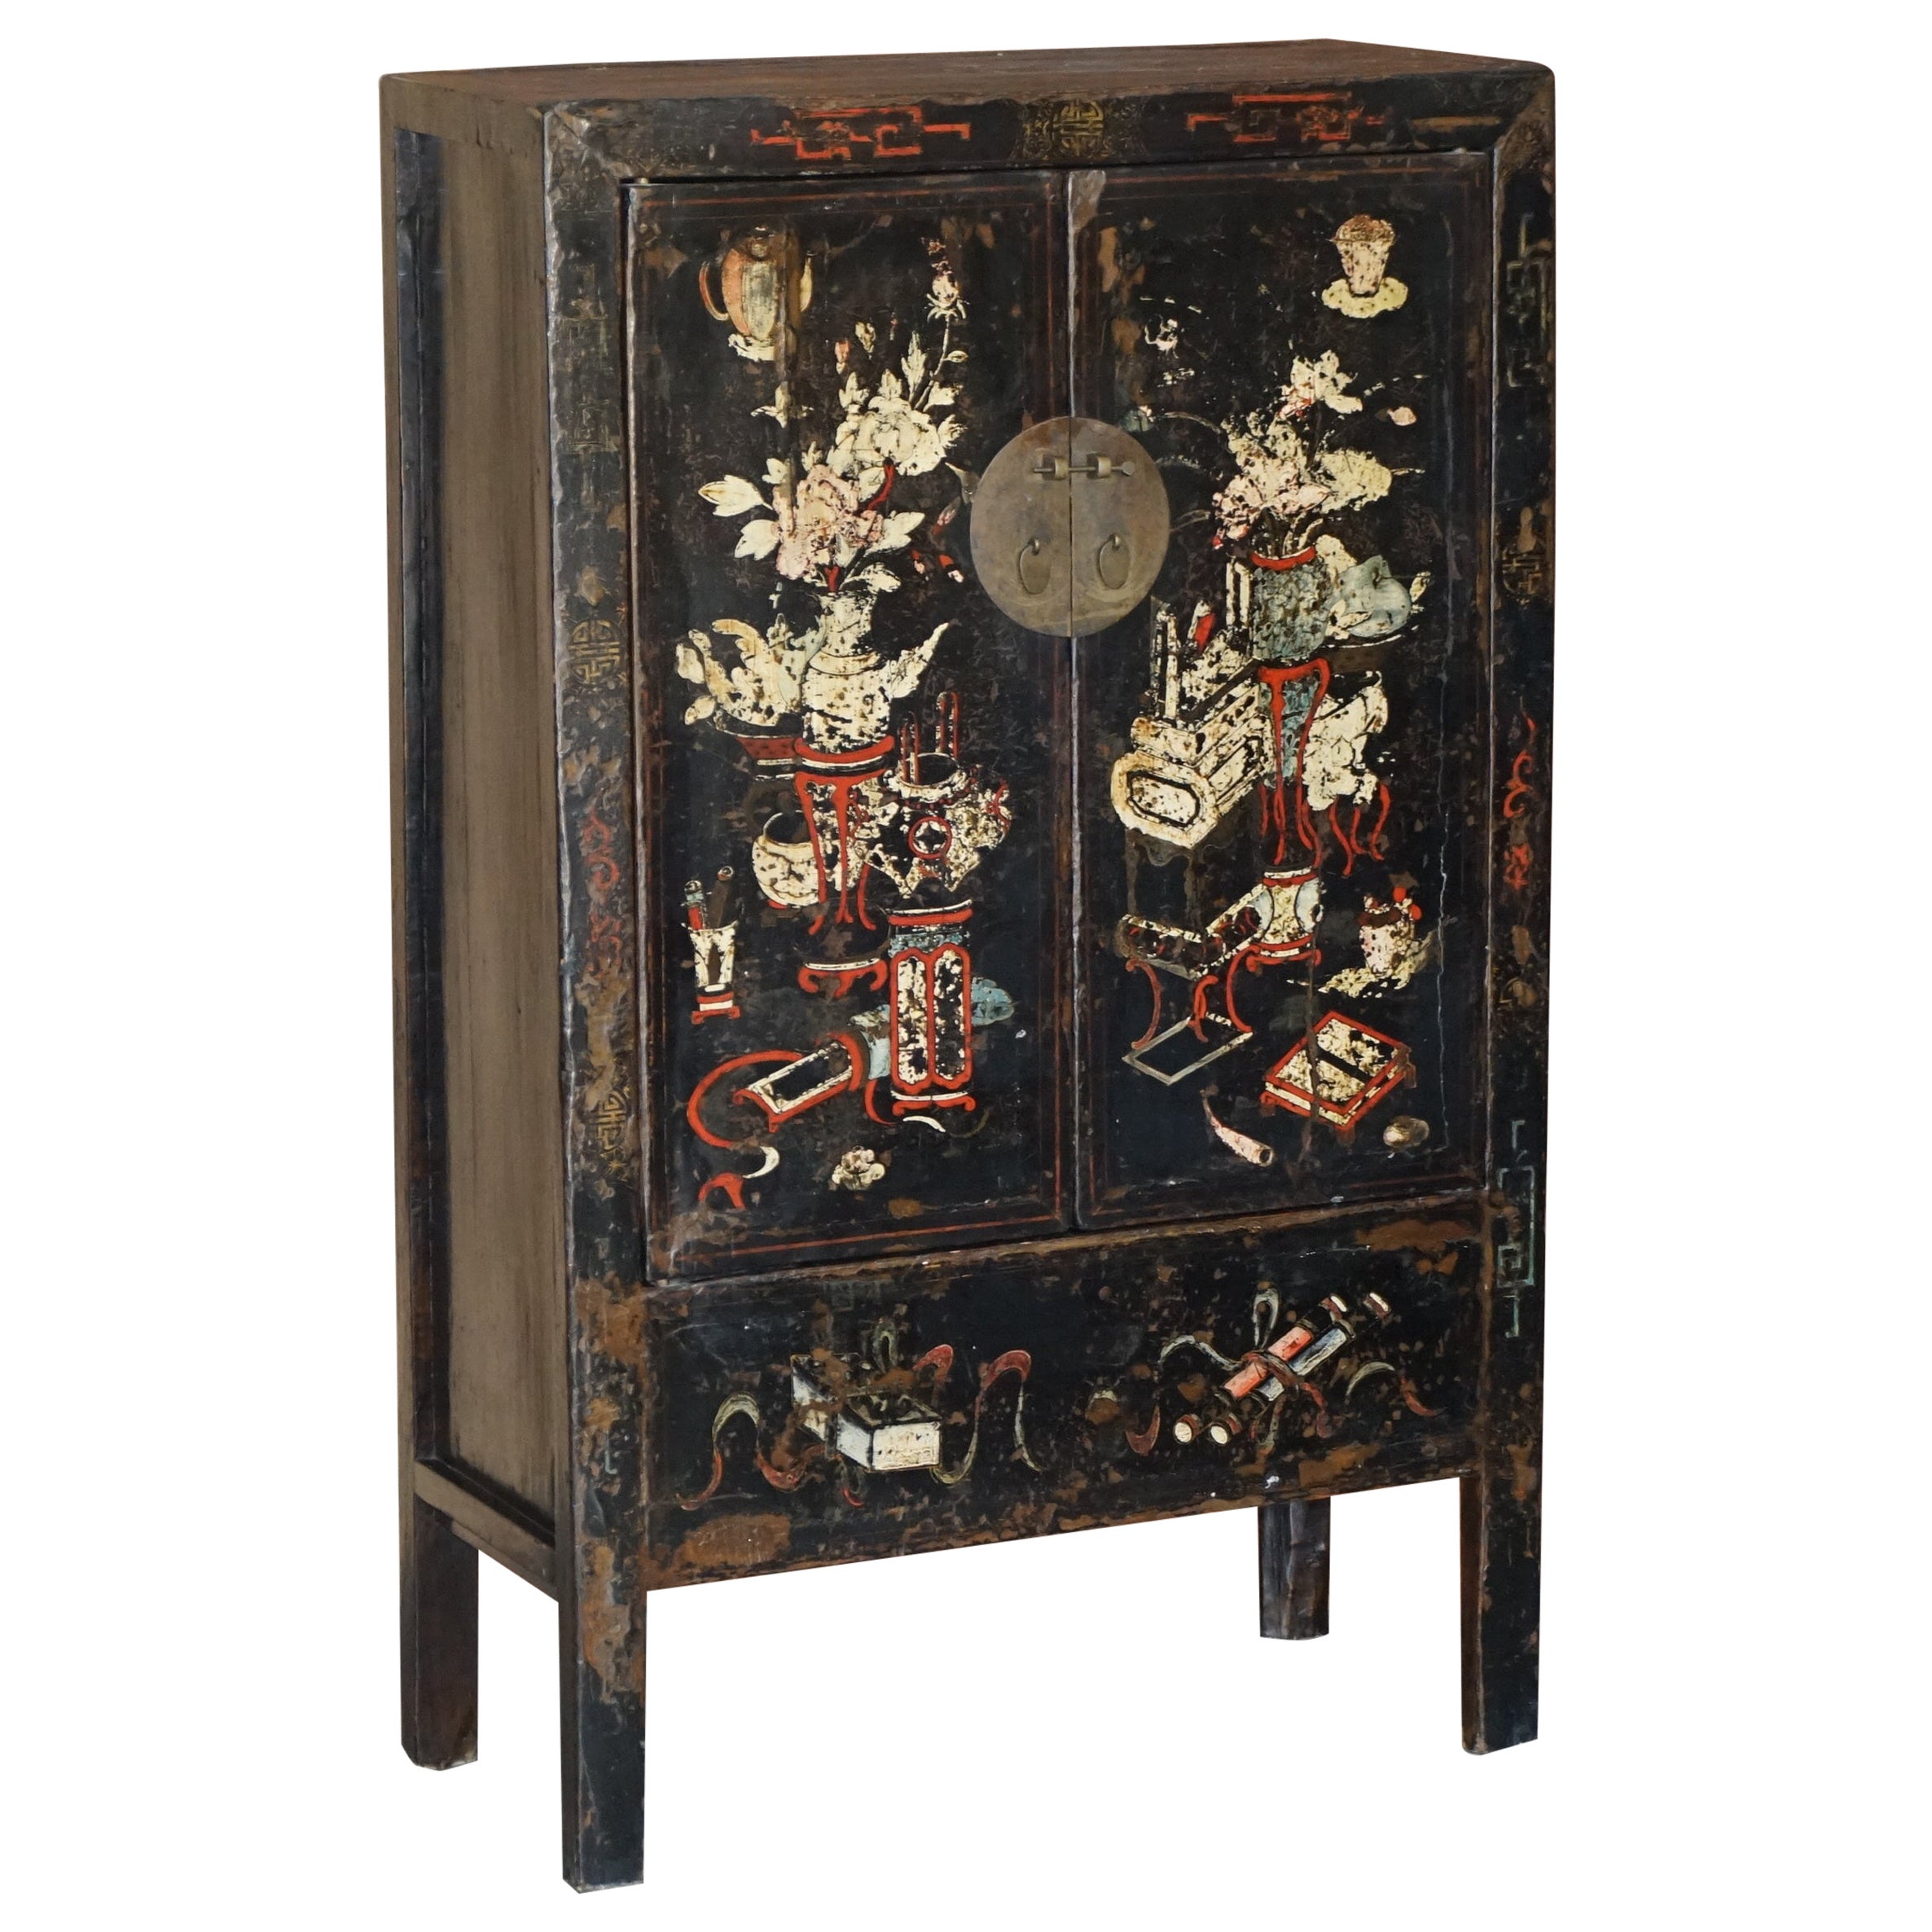 Antiquity circa 1800 Chinese Hand Painted Wedding Cabinet Housekeepers Cupboard (Cabinet de mariage chinois peint à la main)